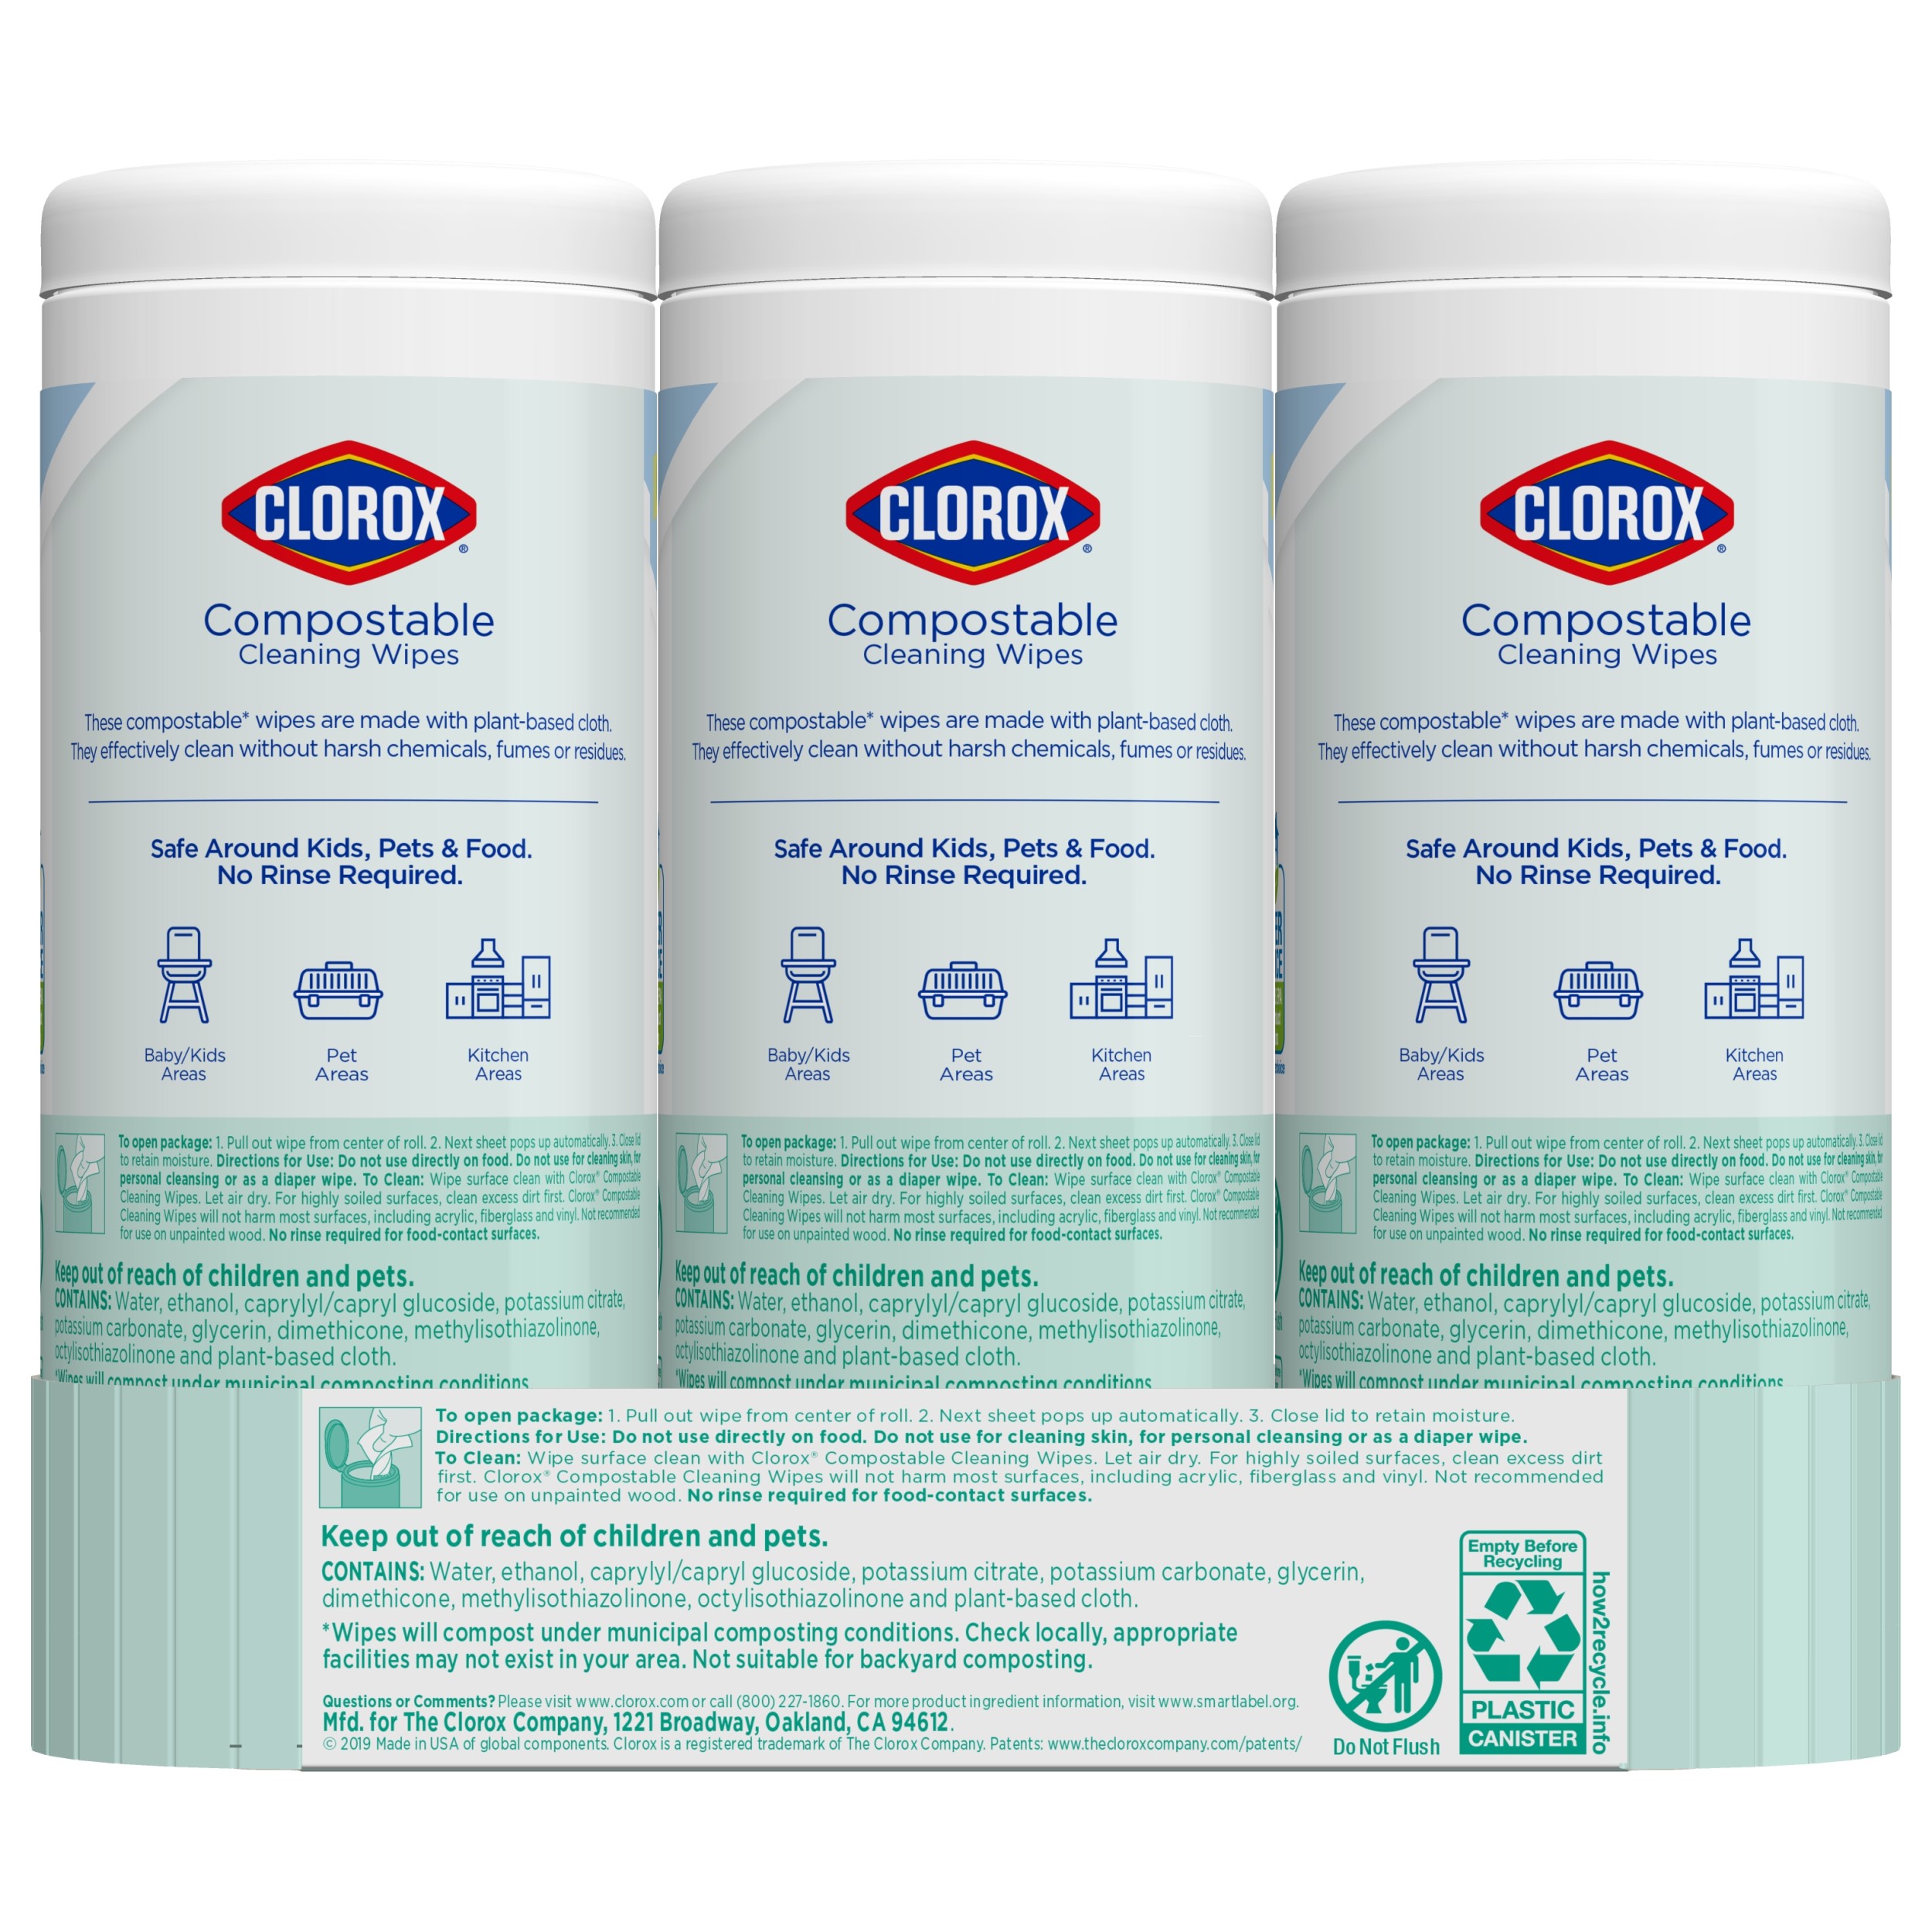 Clorox Compostable Cleaning Wipes - All Purpose Wipes - Unscented, Free & Clear, 35 Count Each - Pack of 3 - image 5 of 12